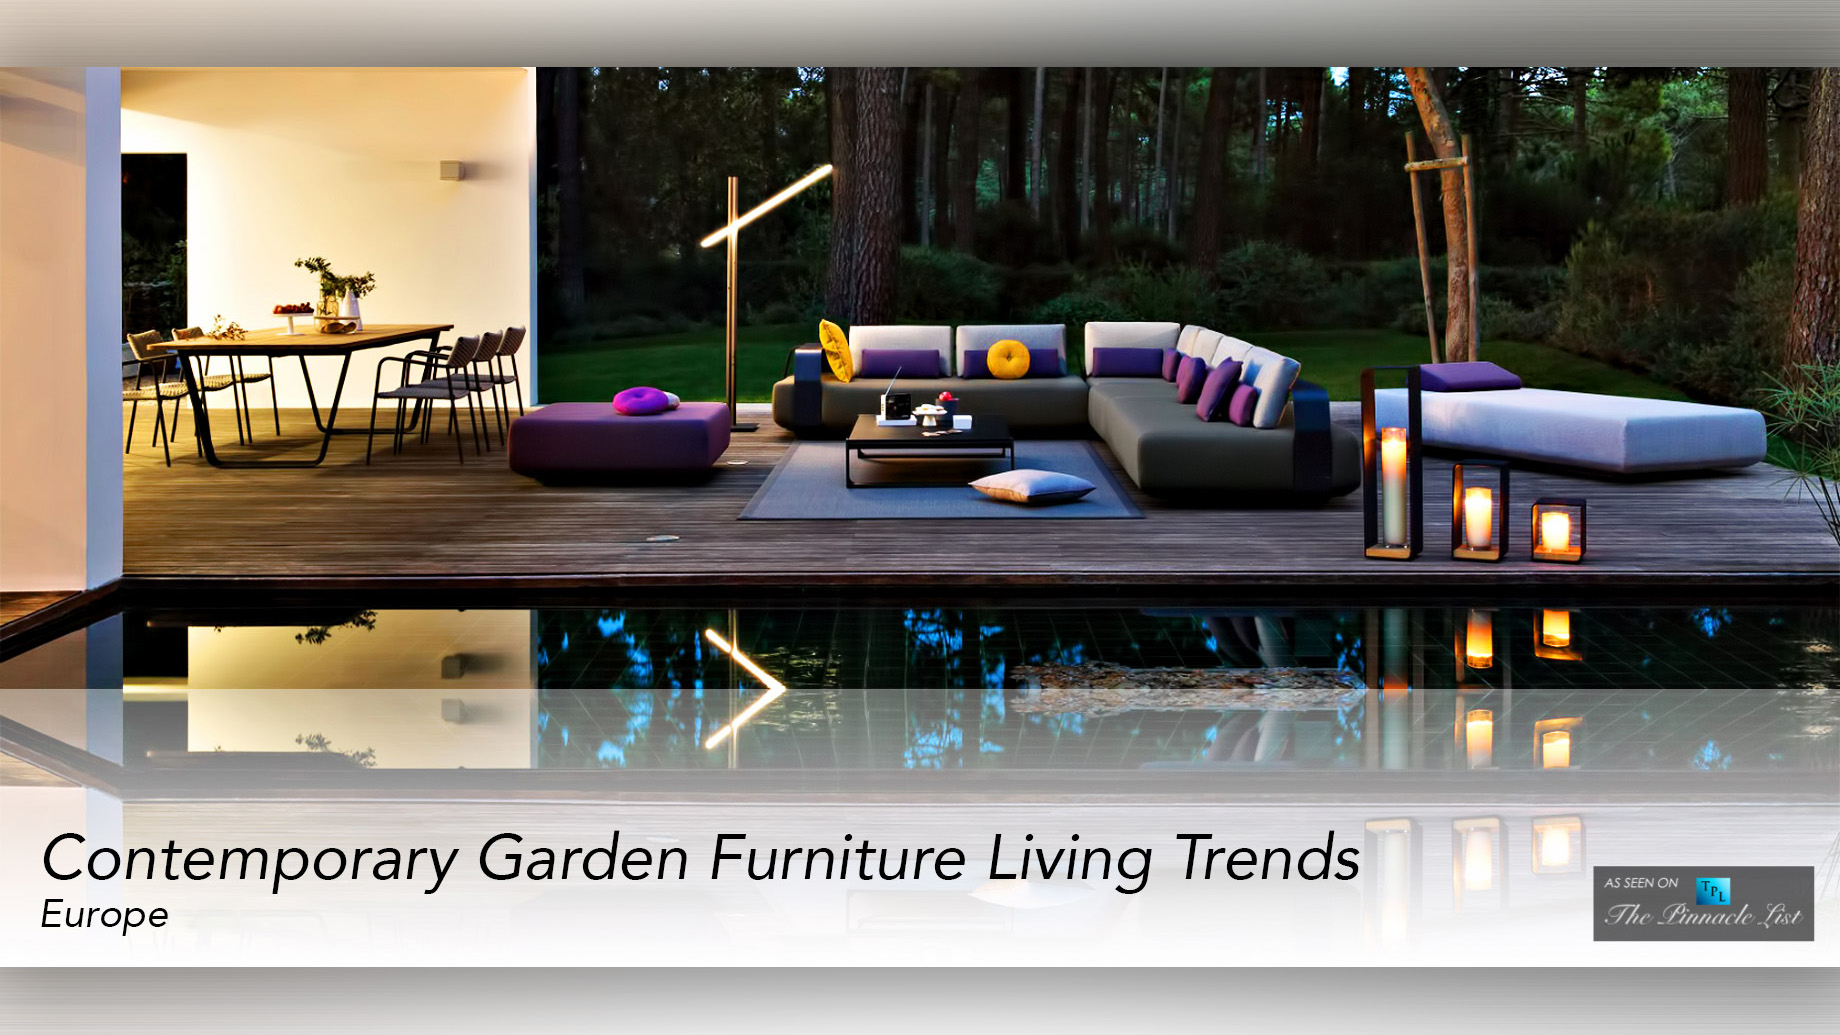 Contemporary Garden Furniture Living Trends from Europe